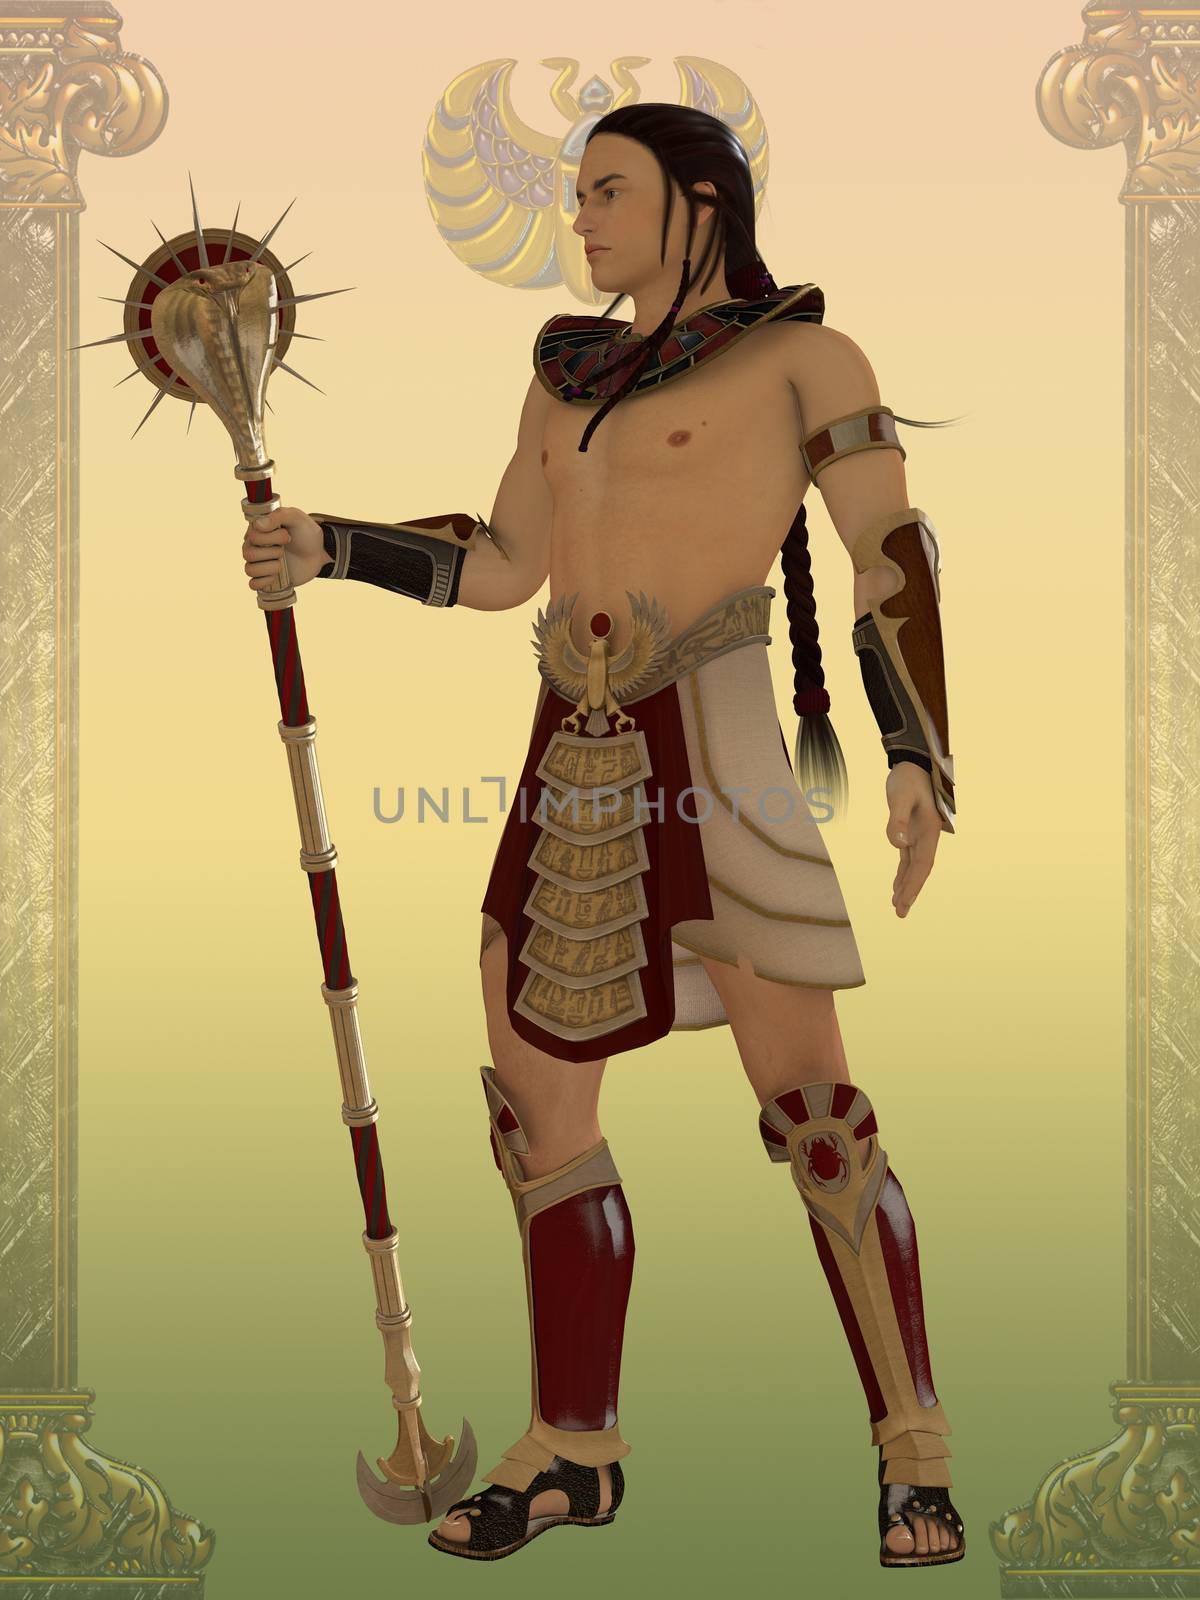 An Egyptian guard for the temples and palaces of the Old Kingdom of Egypt with cobra staff.